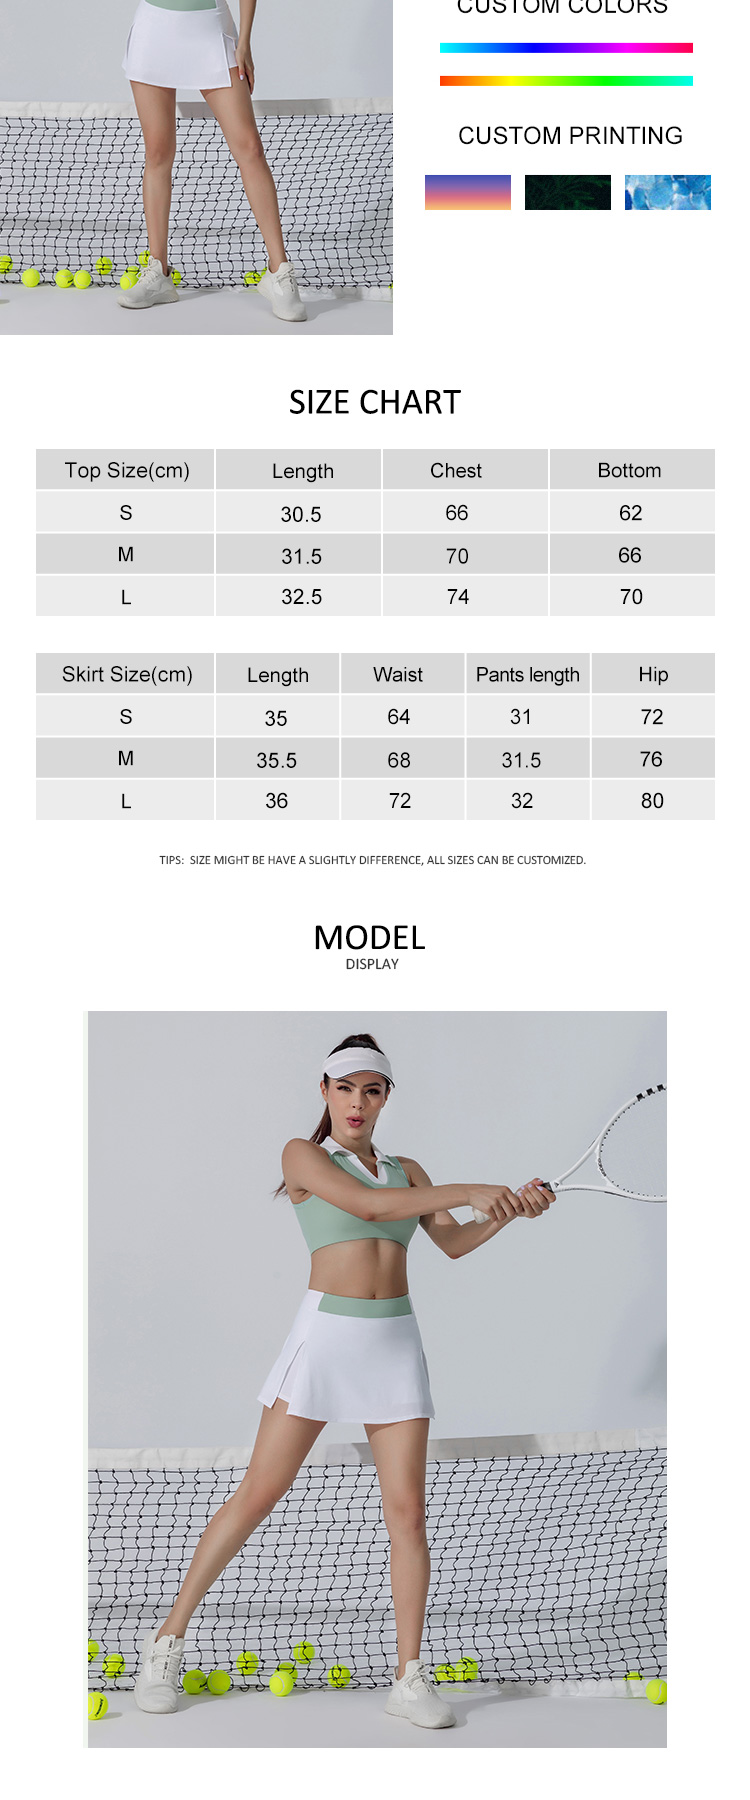 INGOR woman tennis wear production at the gym-5